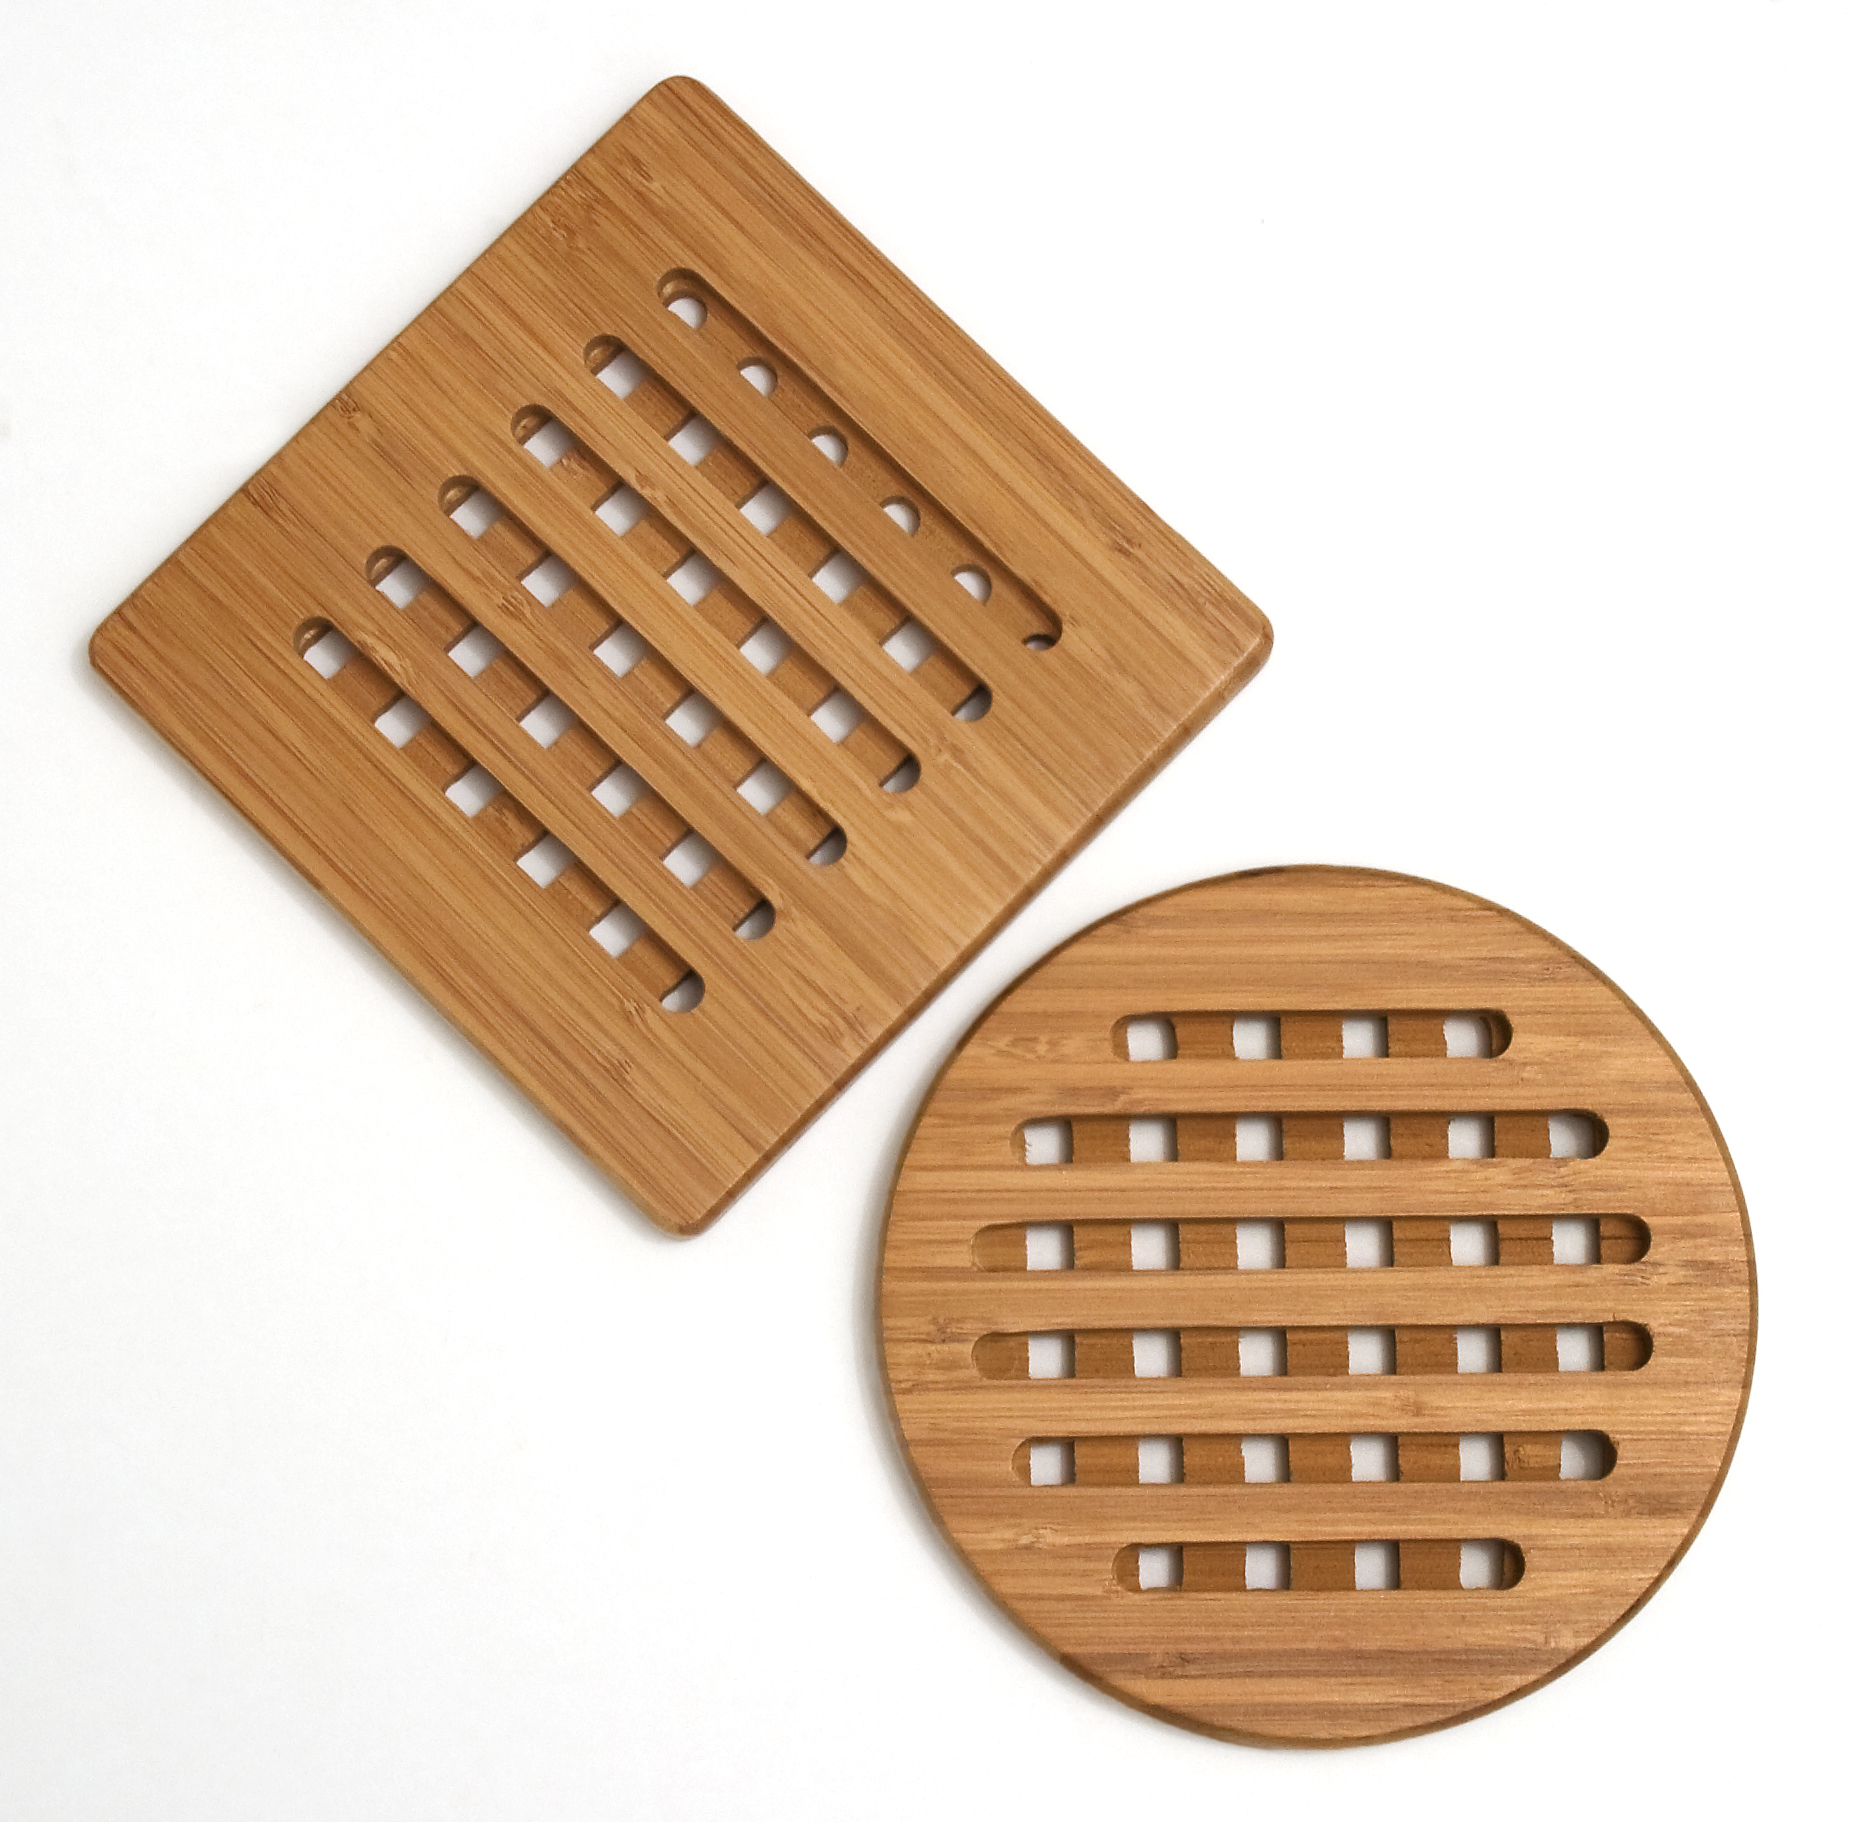 Bamboo S/2 Trivets- 1 round, 1 square